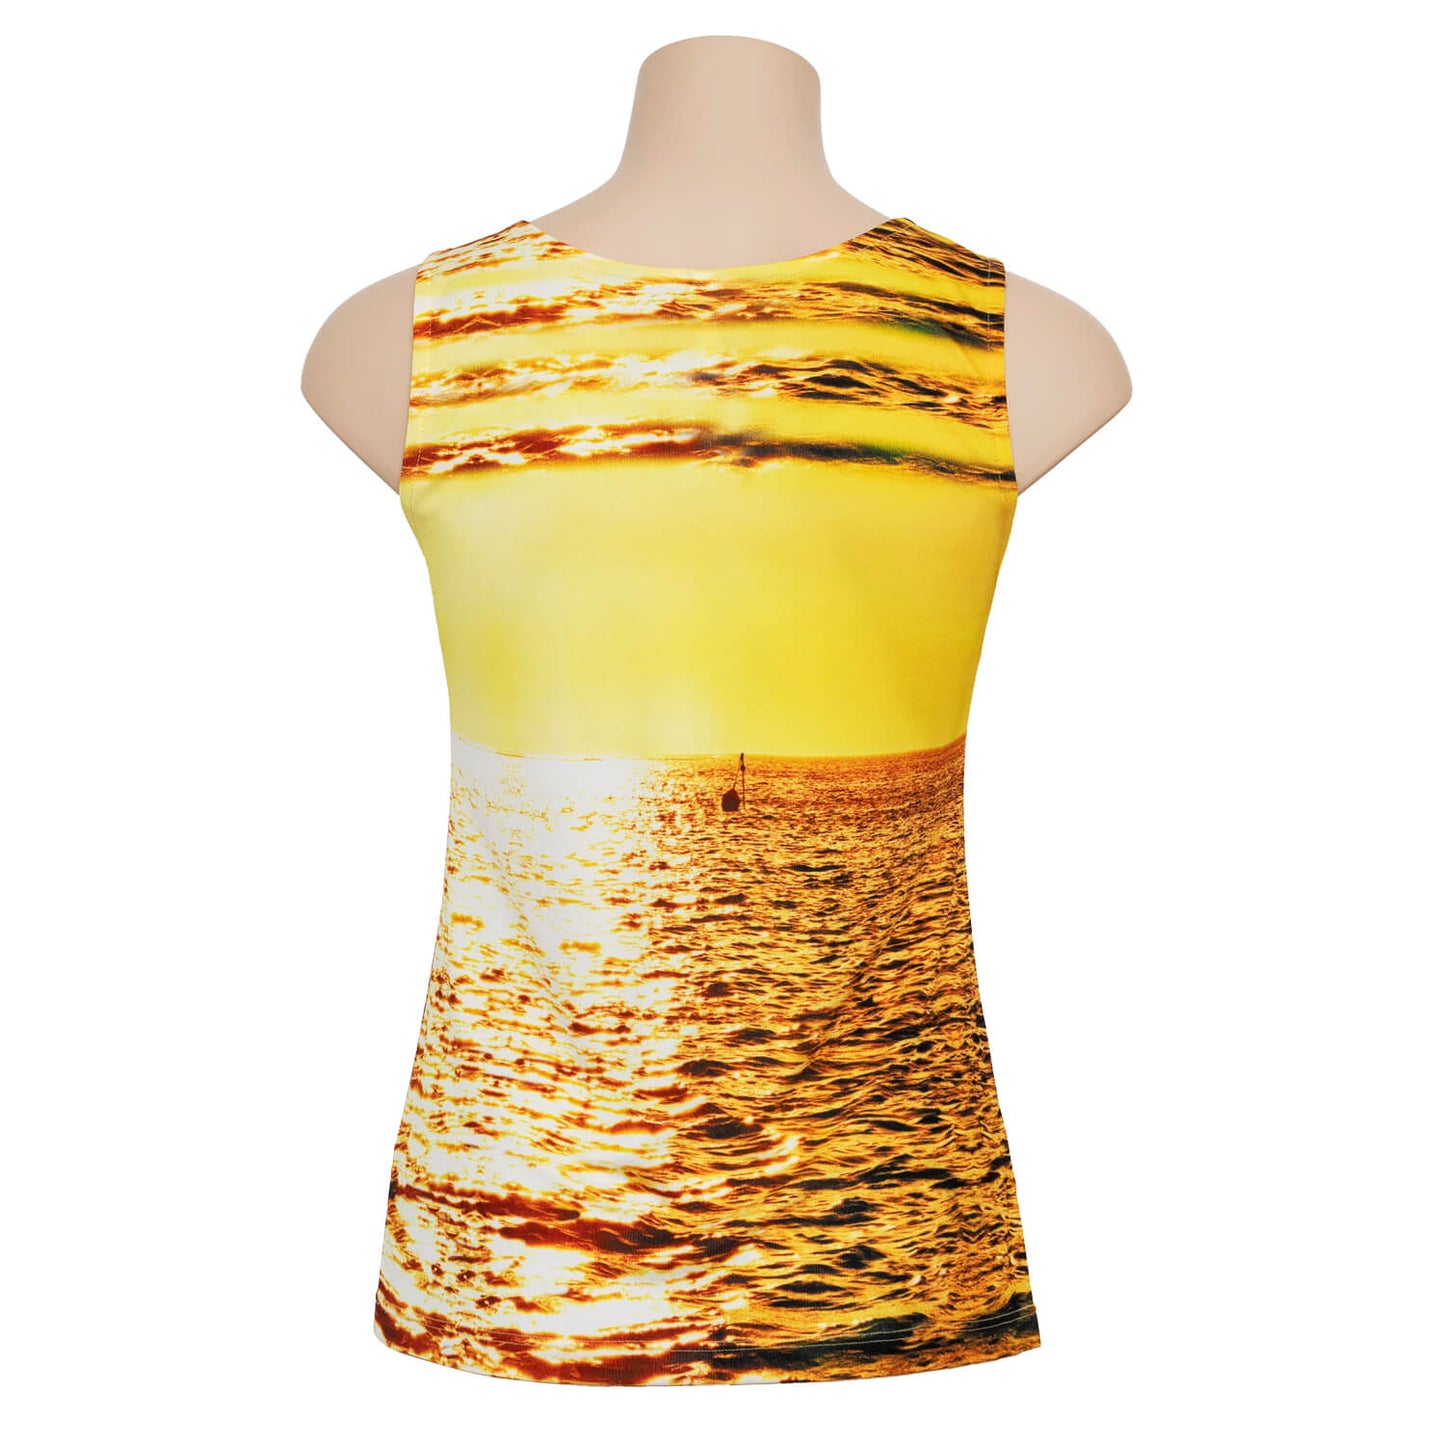 back view midas touch gold silk top by seahorse silks